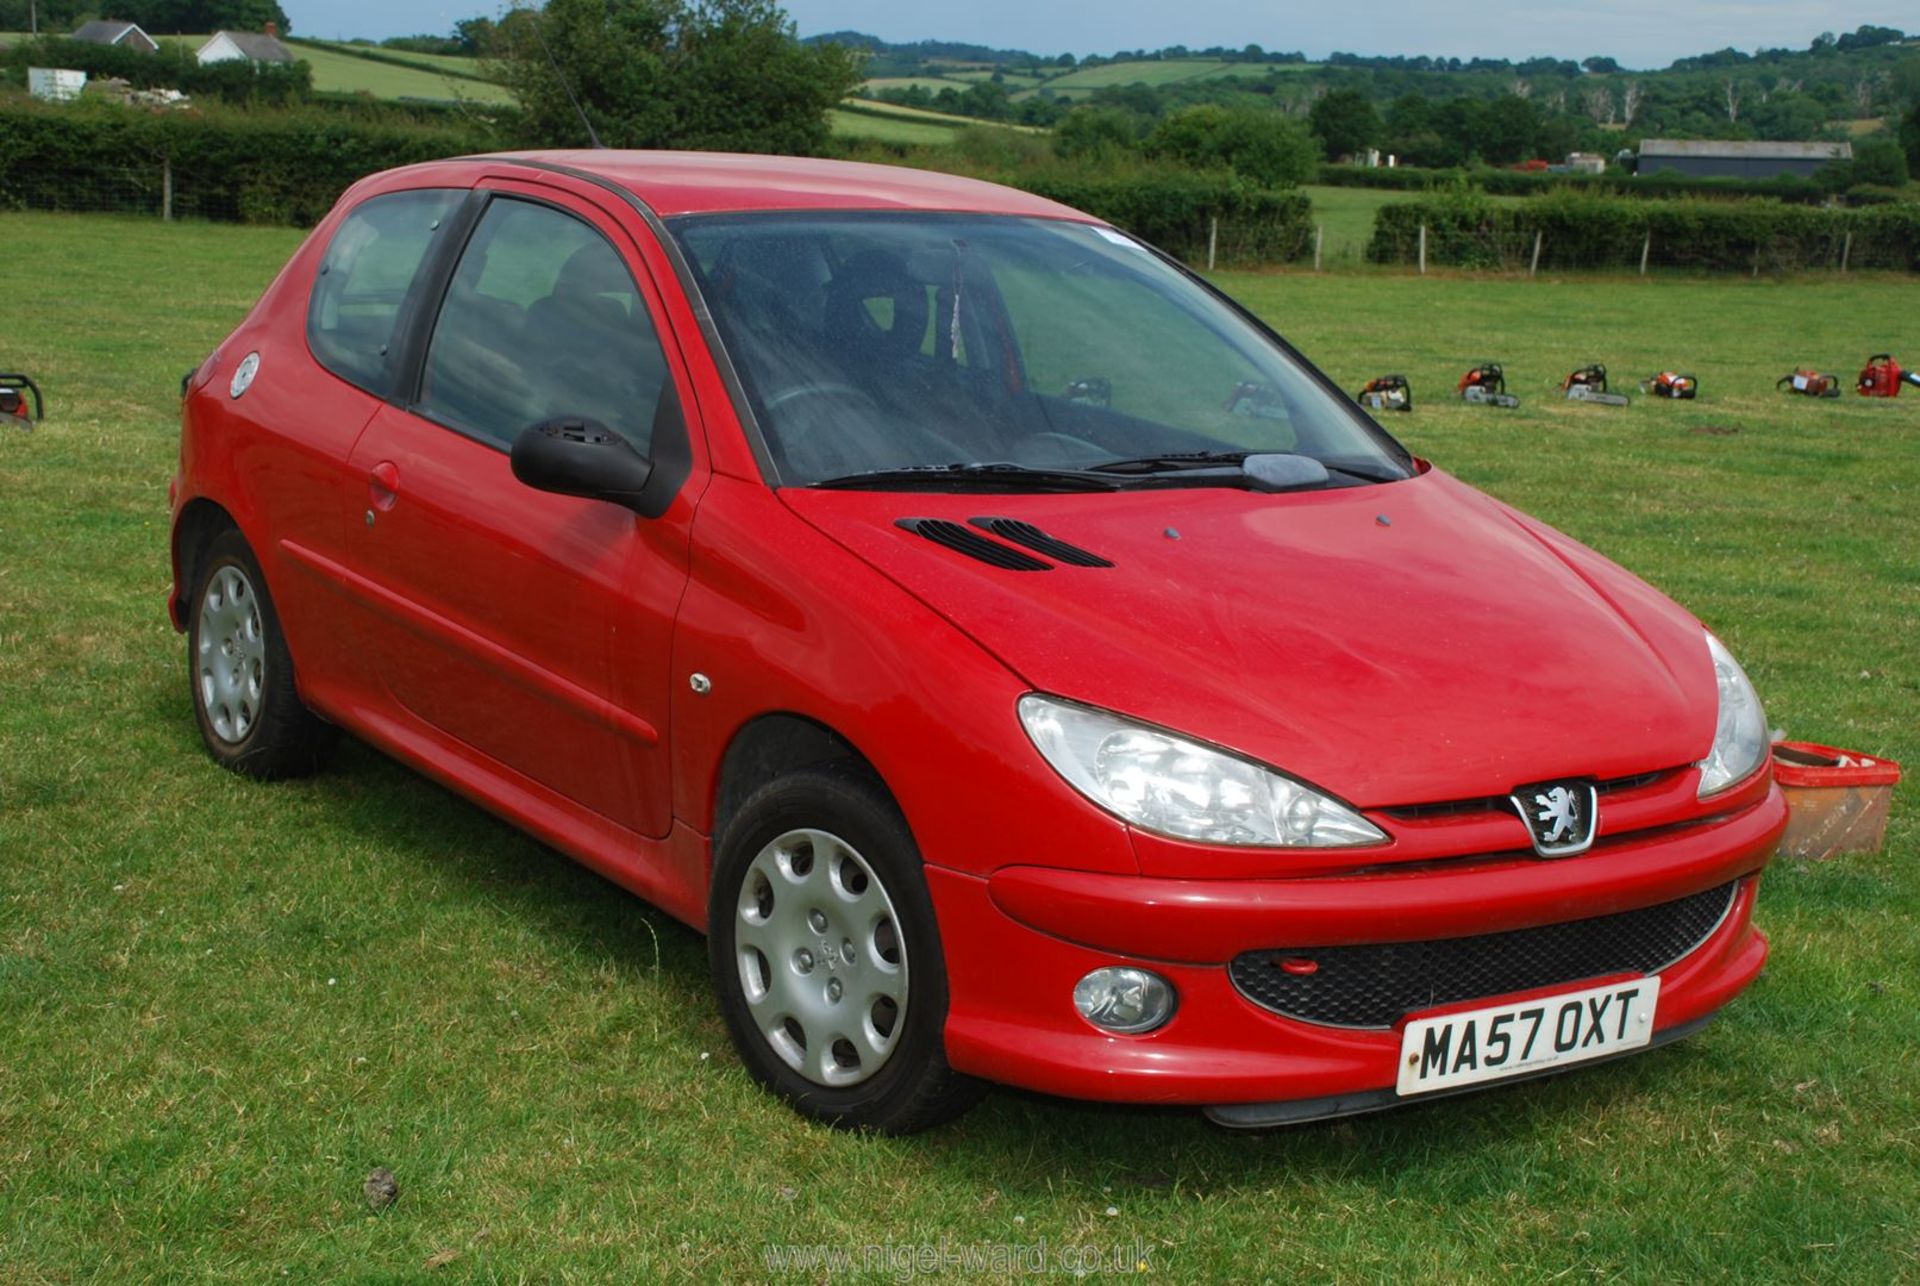 A petrol engined Peugeot 206 hatchback 1.4 Look 3 door in red - Image 2 of 4